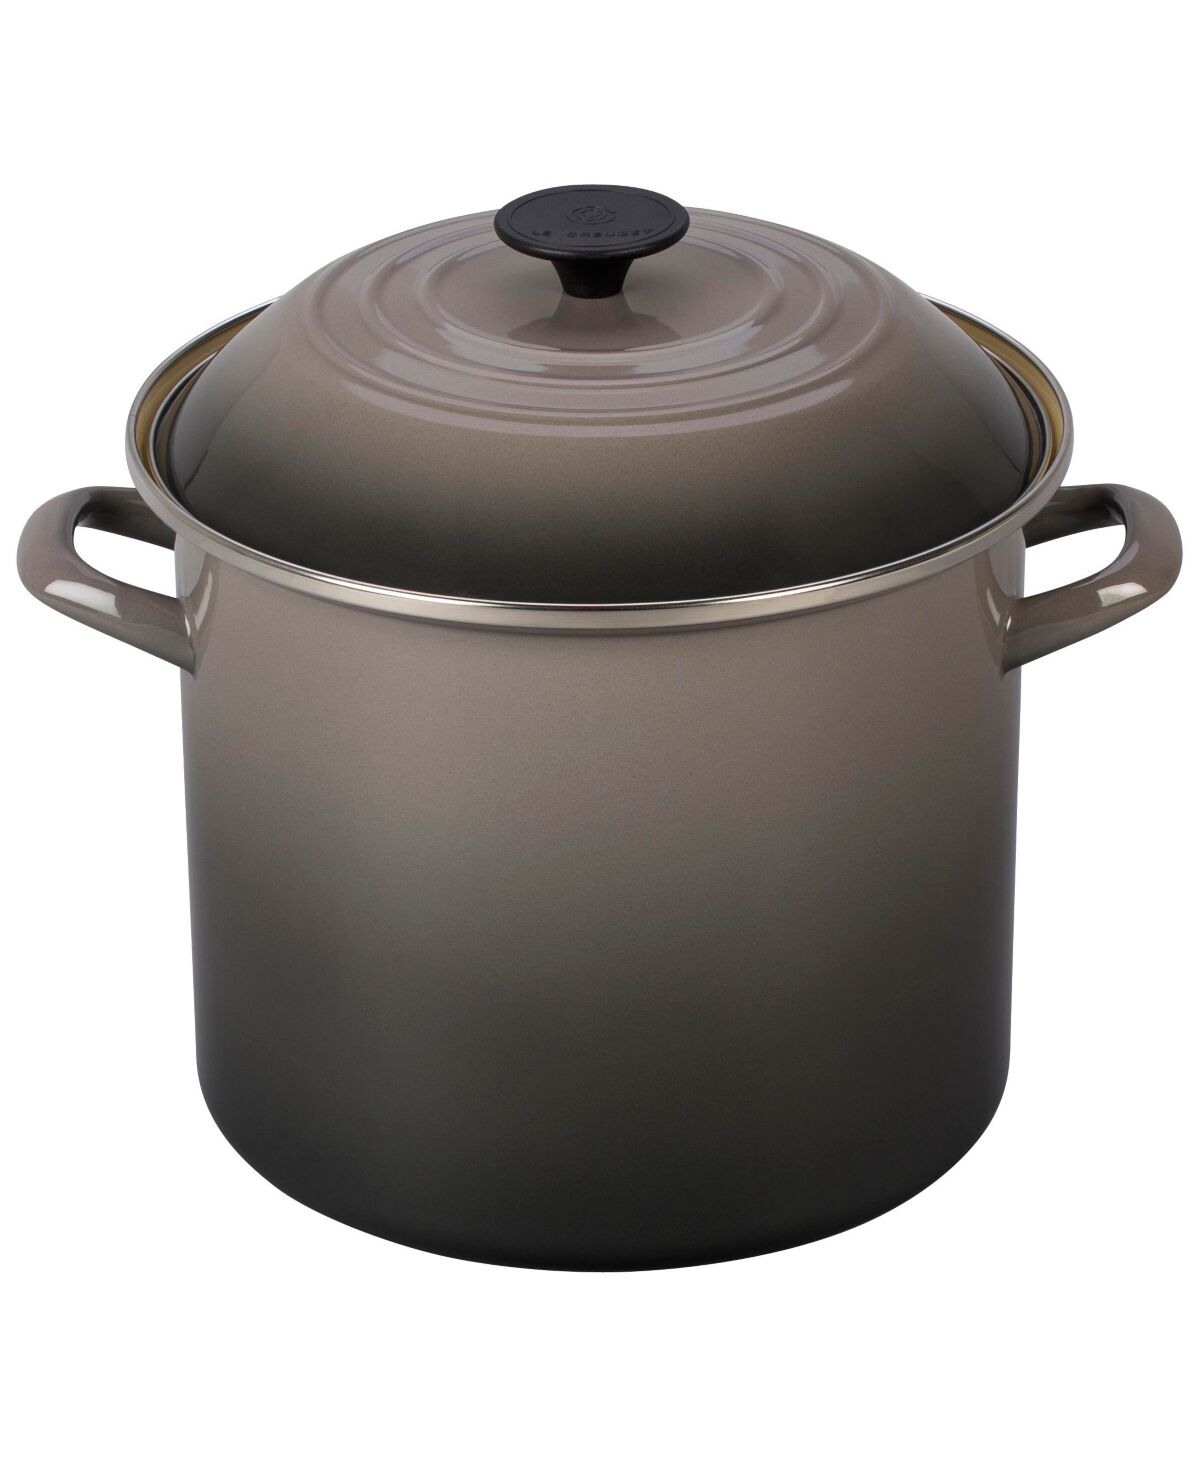 Le Creuset 10 Quart Enamel on Steel Stock Pot with Lid - Oyster